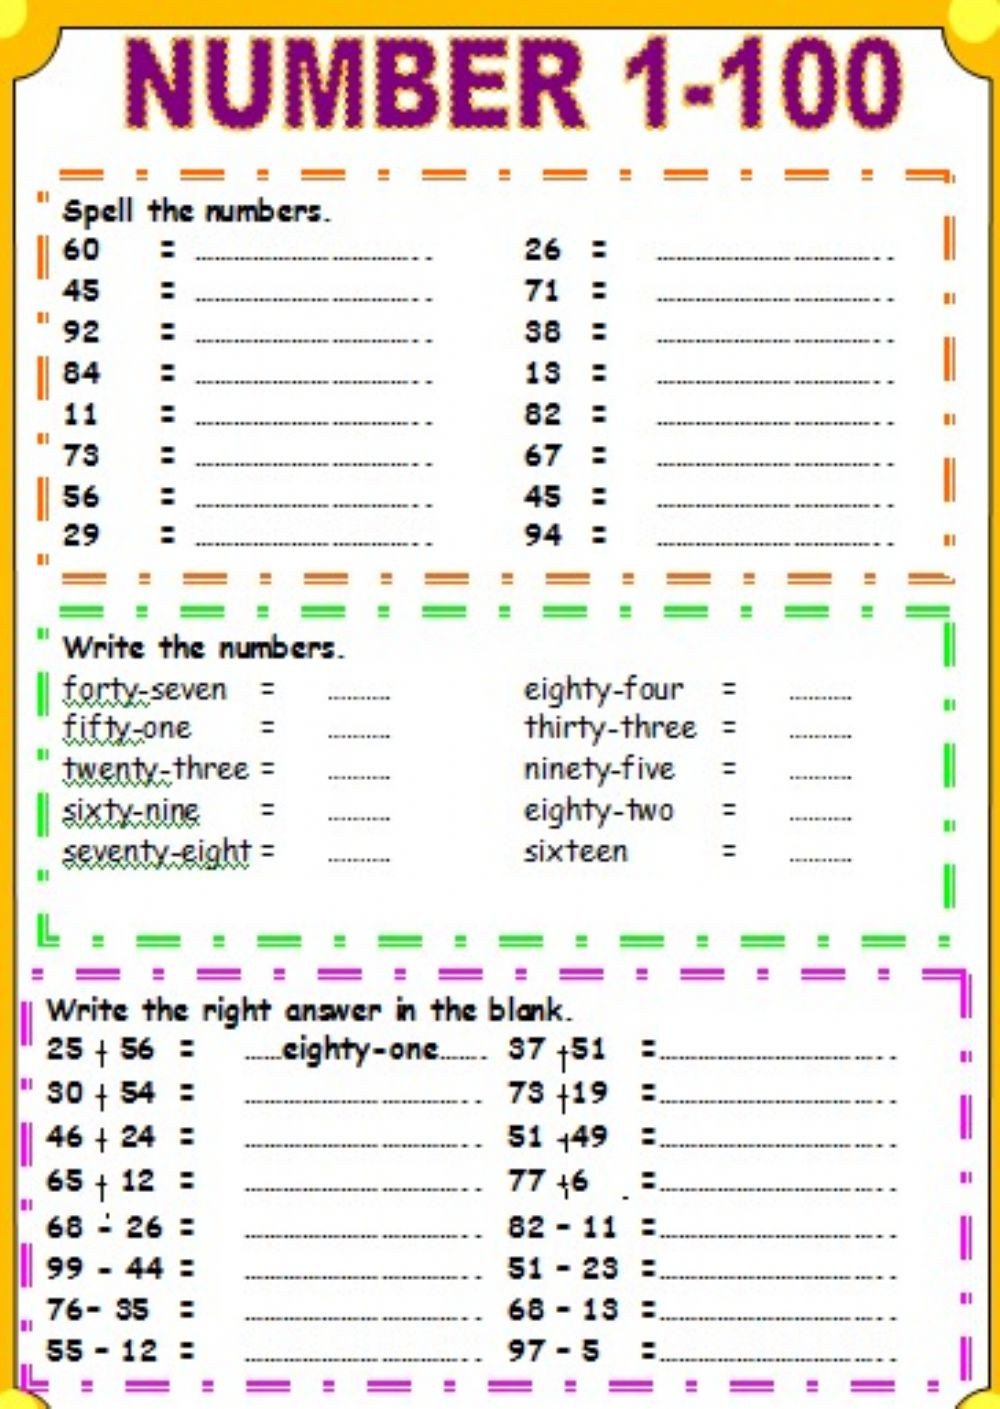 Spanish Numbers Worksheet 1 100 Numbers 1 to 100 Numbers Exercise